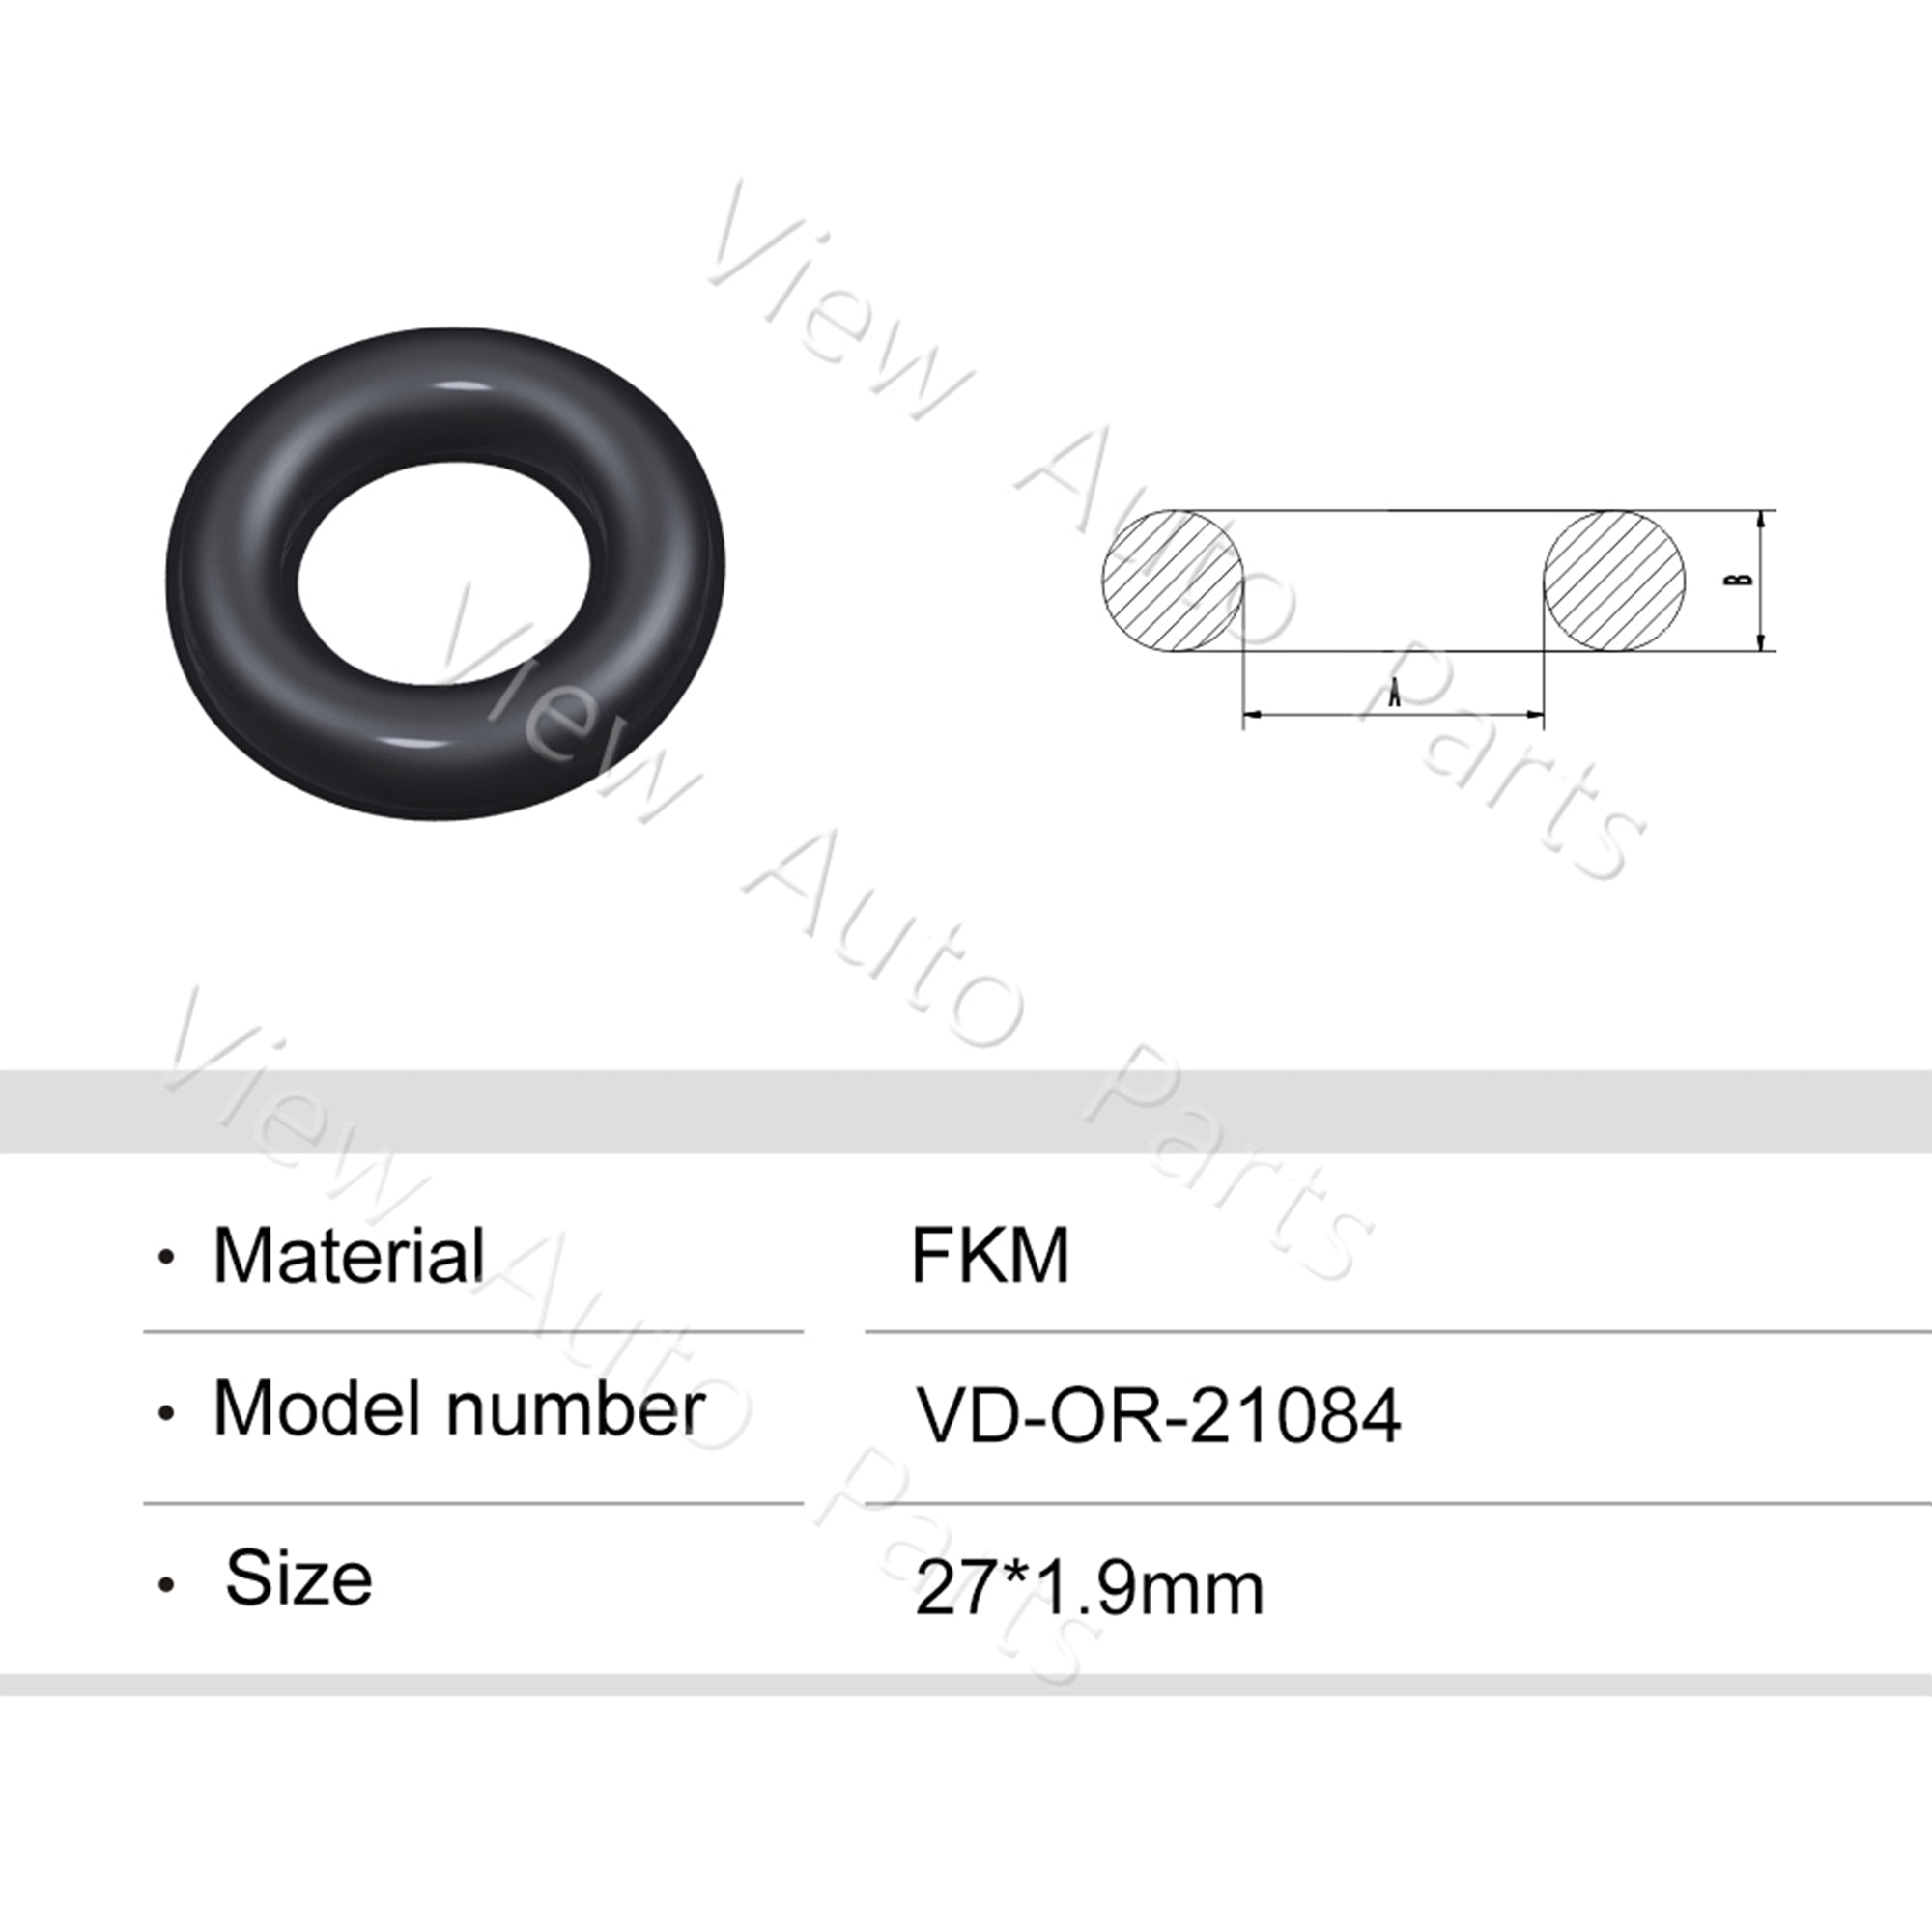 Fuel Injector Rubber Seal Orings for Fuel Injector Repair Kits FKM & Rubber Heat Resistant, Size: 27*1.9mm OR-21084